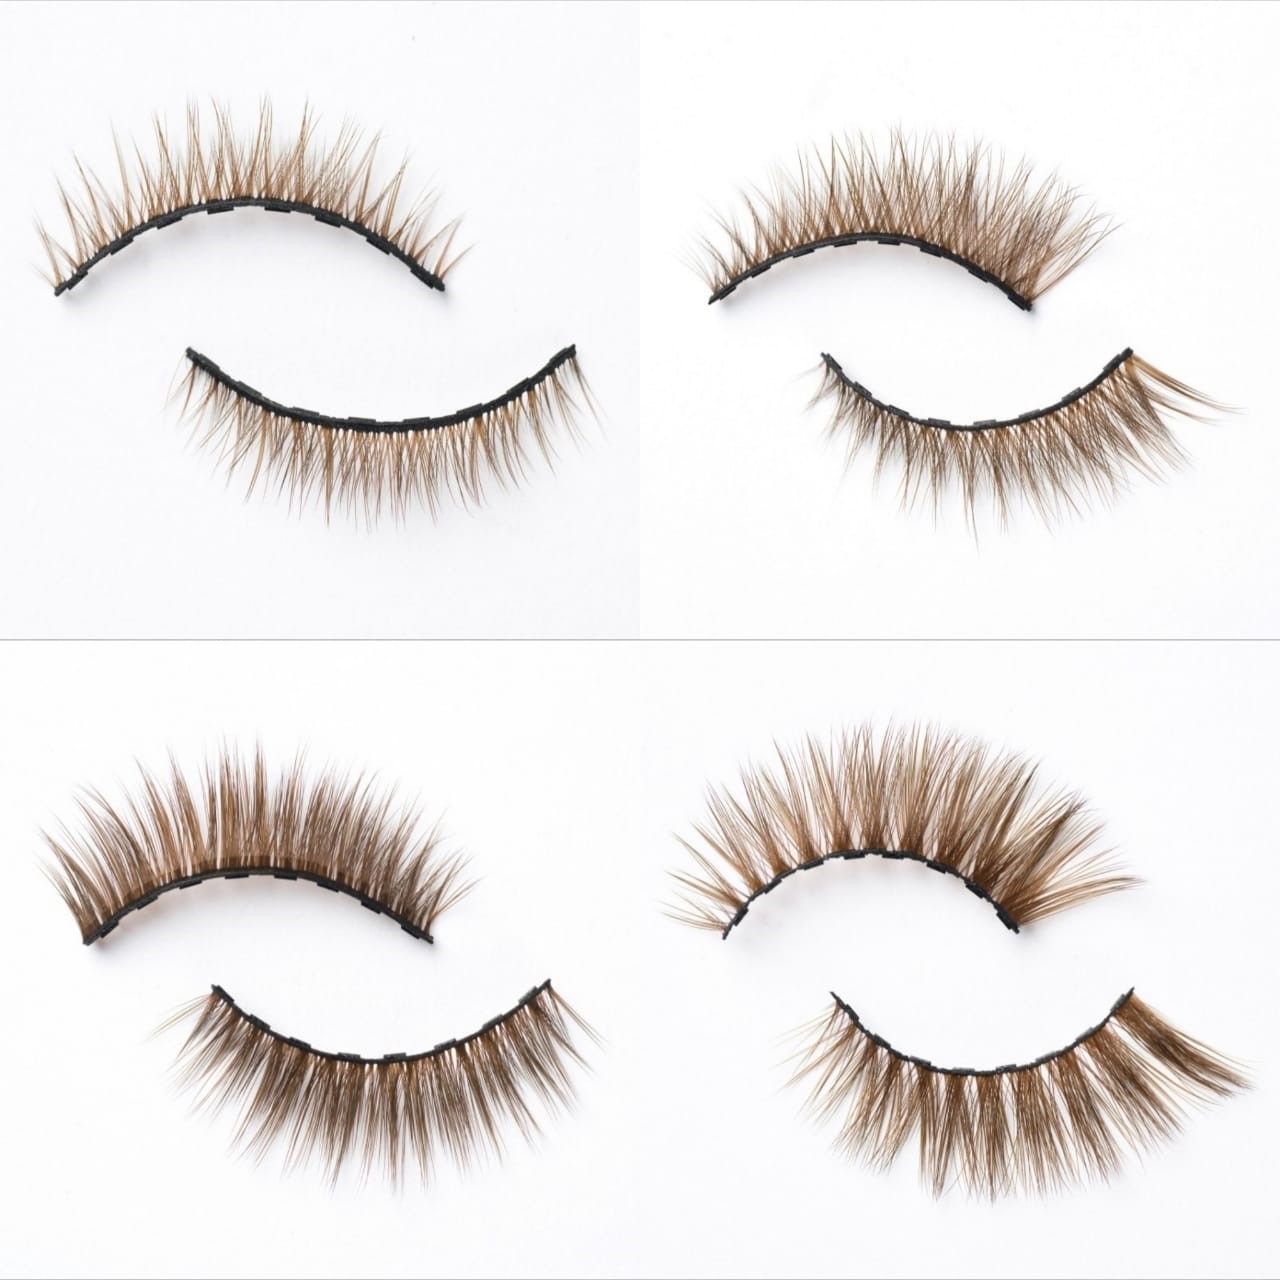 A collection of Magnetic Fake lashes